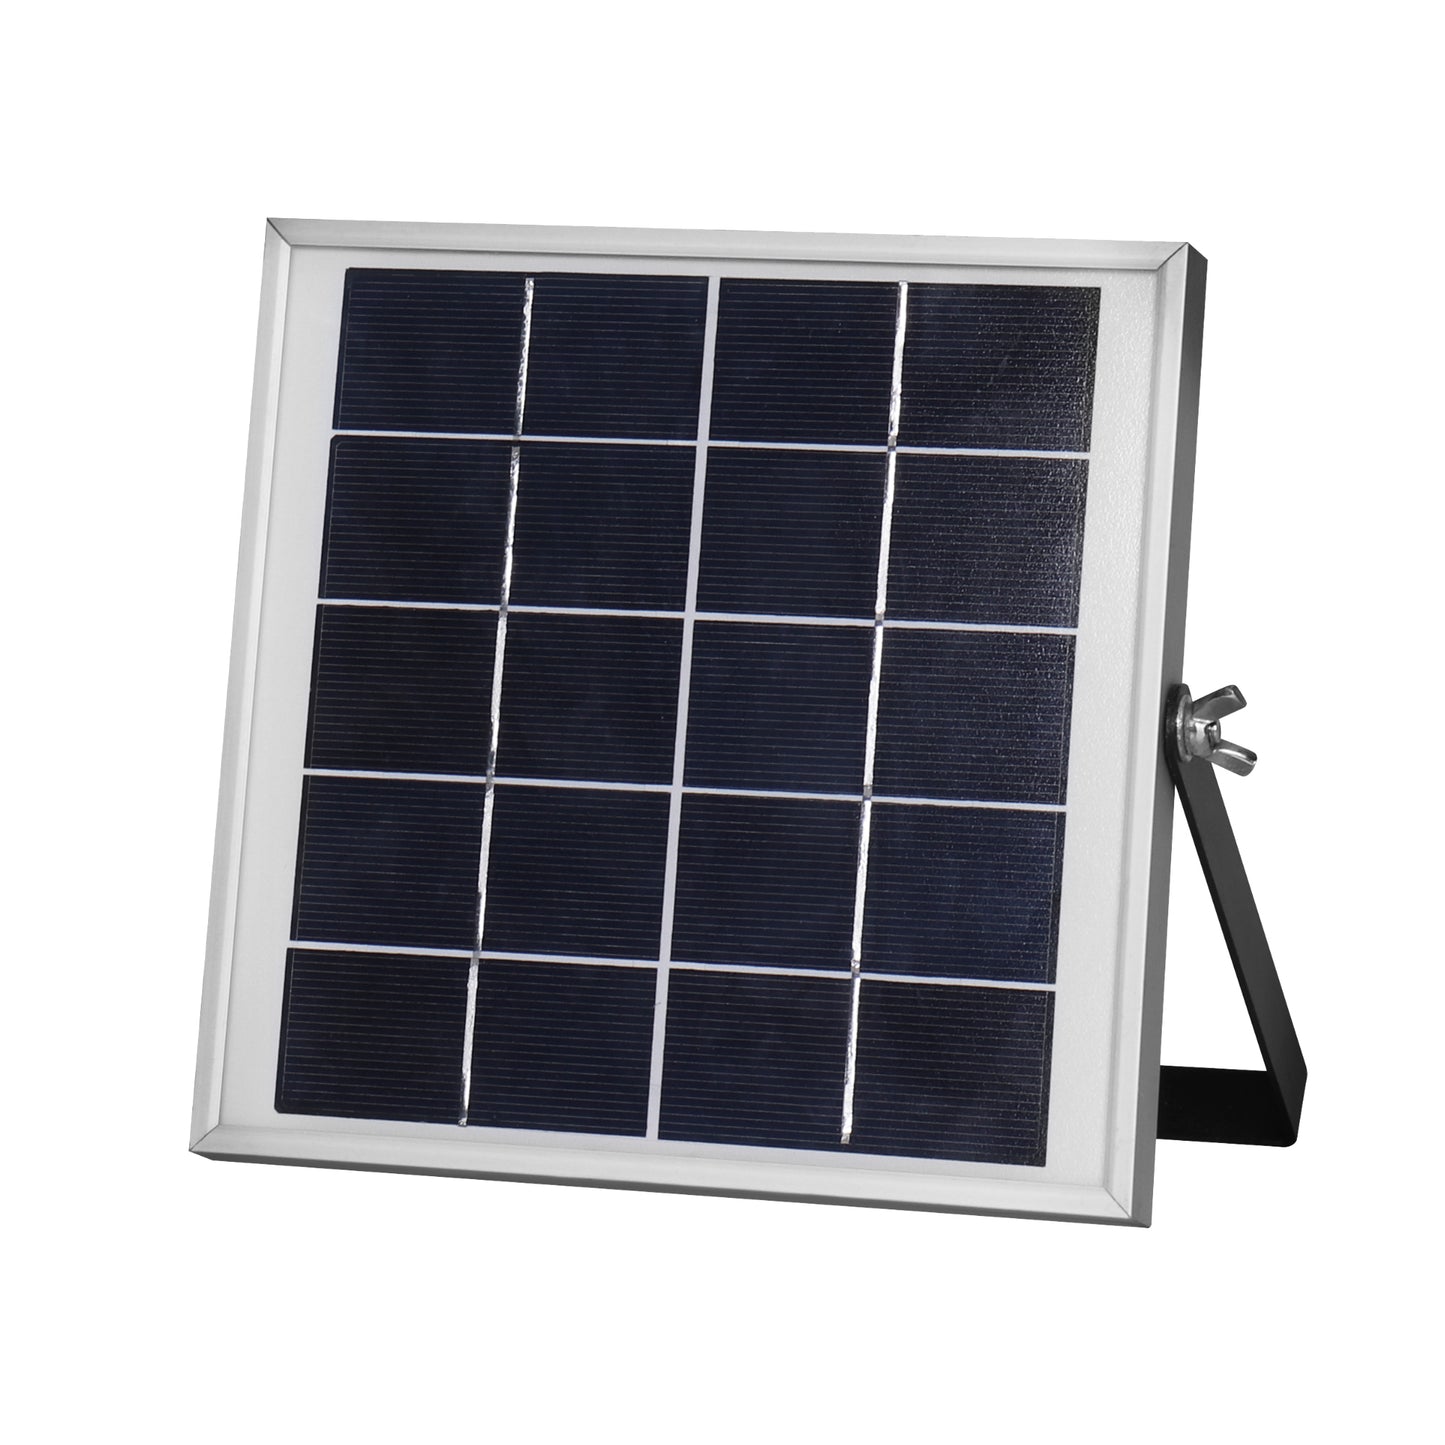 5-25W COLD SOLAR RECHARGEABLE LED PROJECTOR - MATEL 